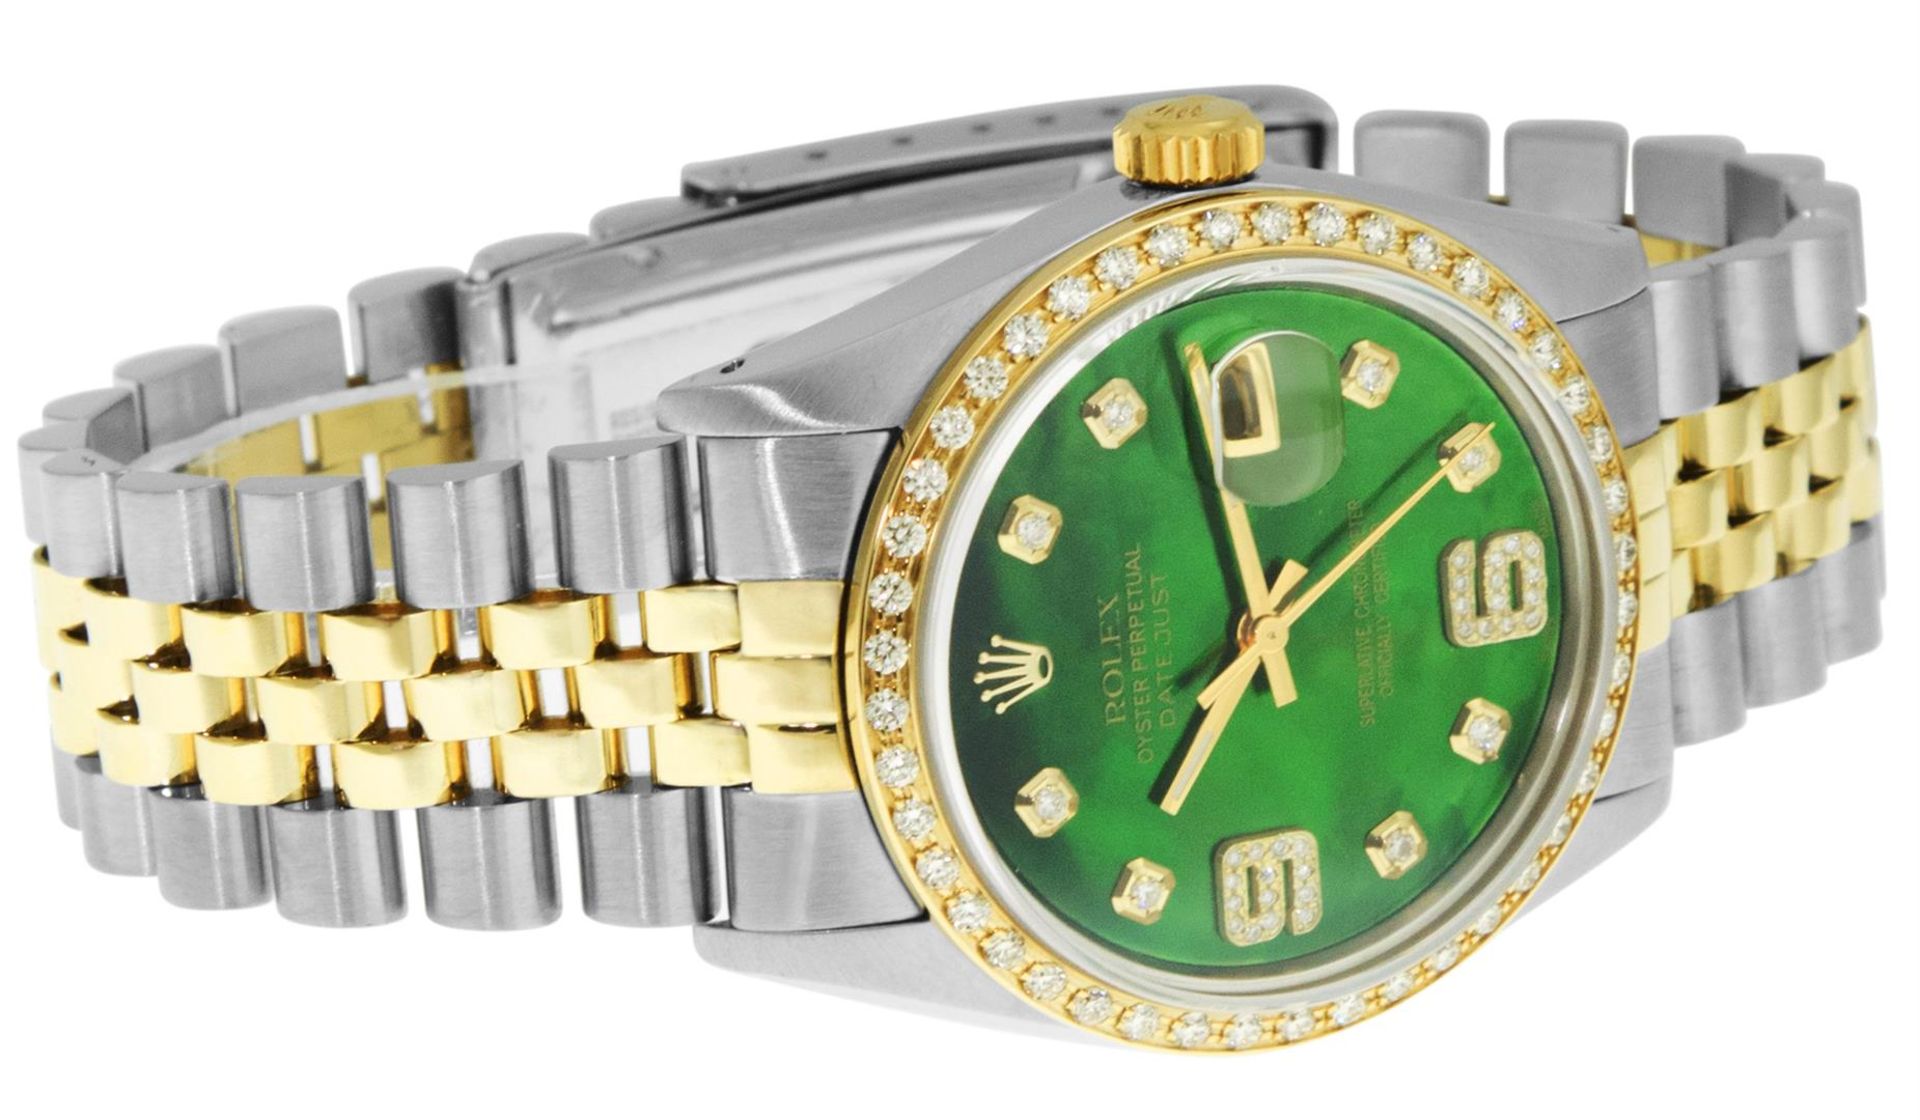 Rolex 2 Tone YG/SS Green Diamond Oyster Perpetual Datejust Wristwatch 36MM - Image 7 of 9